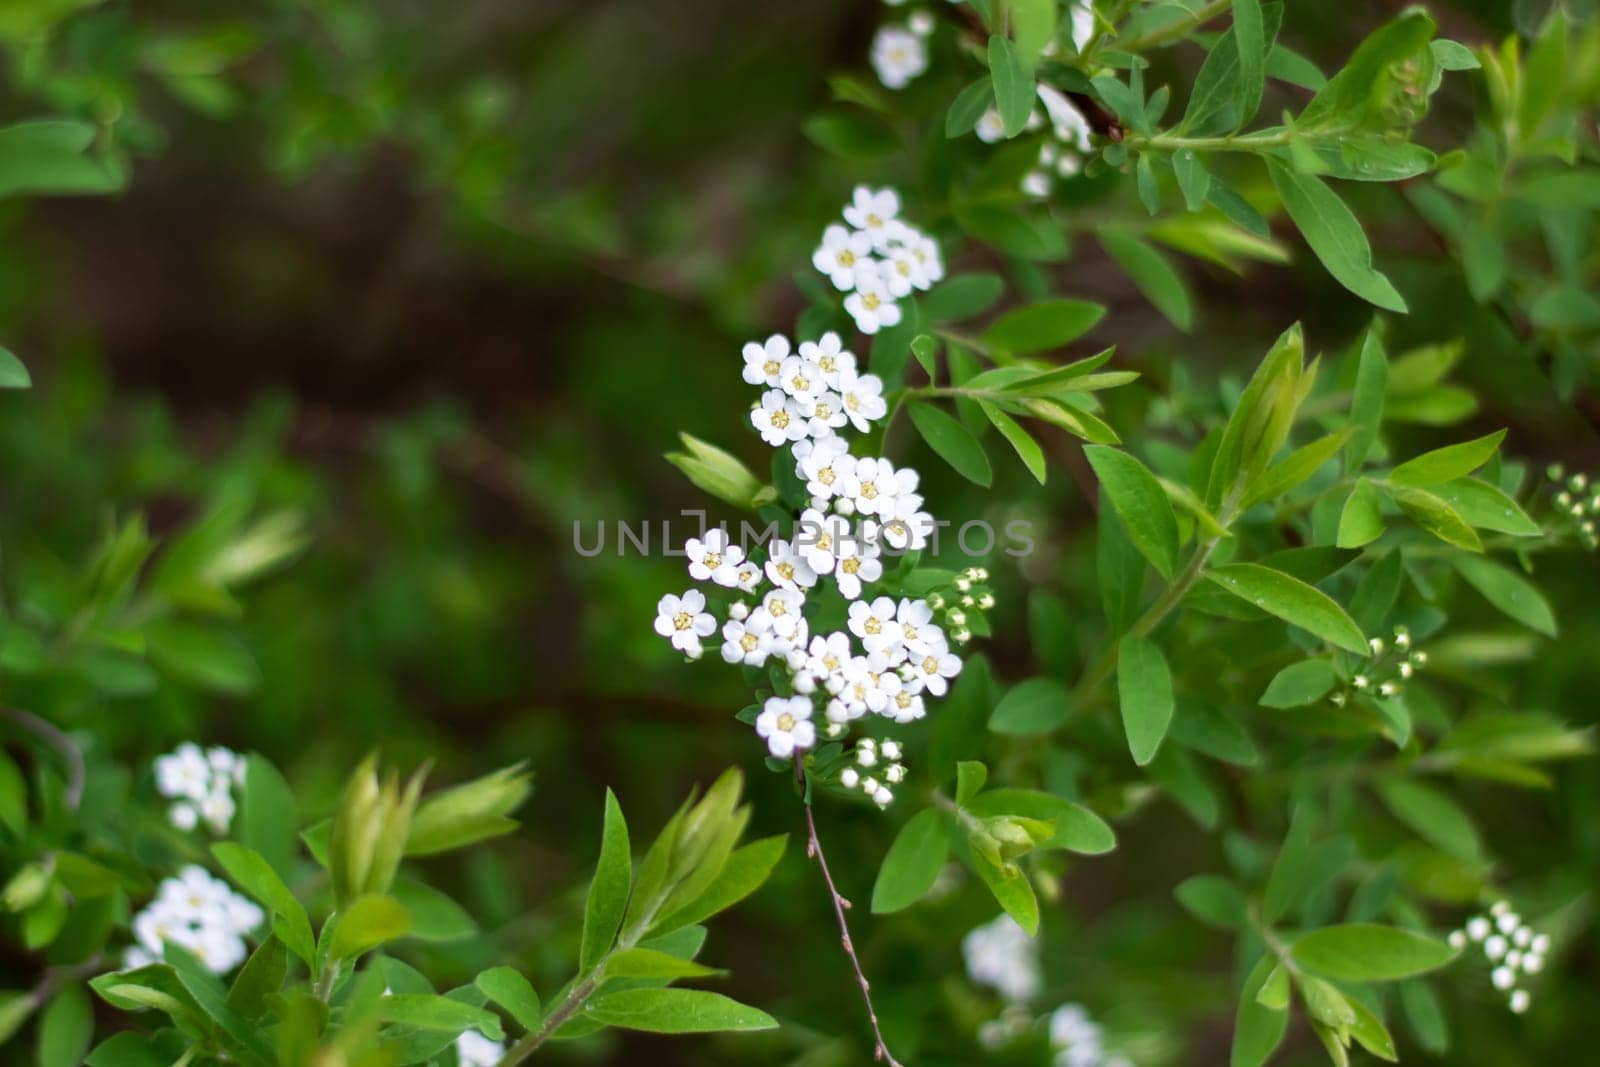 A flowering subshrub with white petals and green leaves, ideal as groundcover by Vera1703